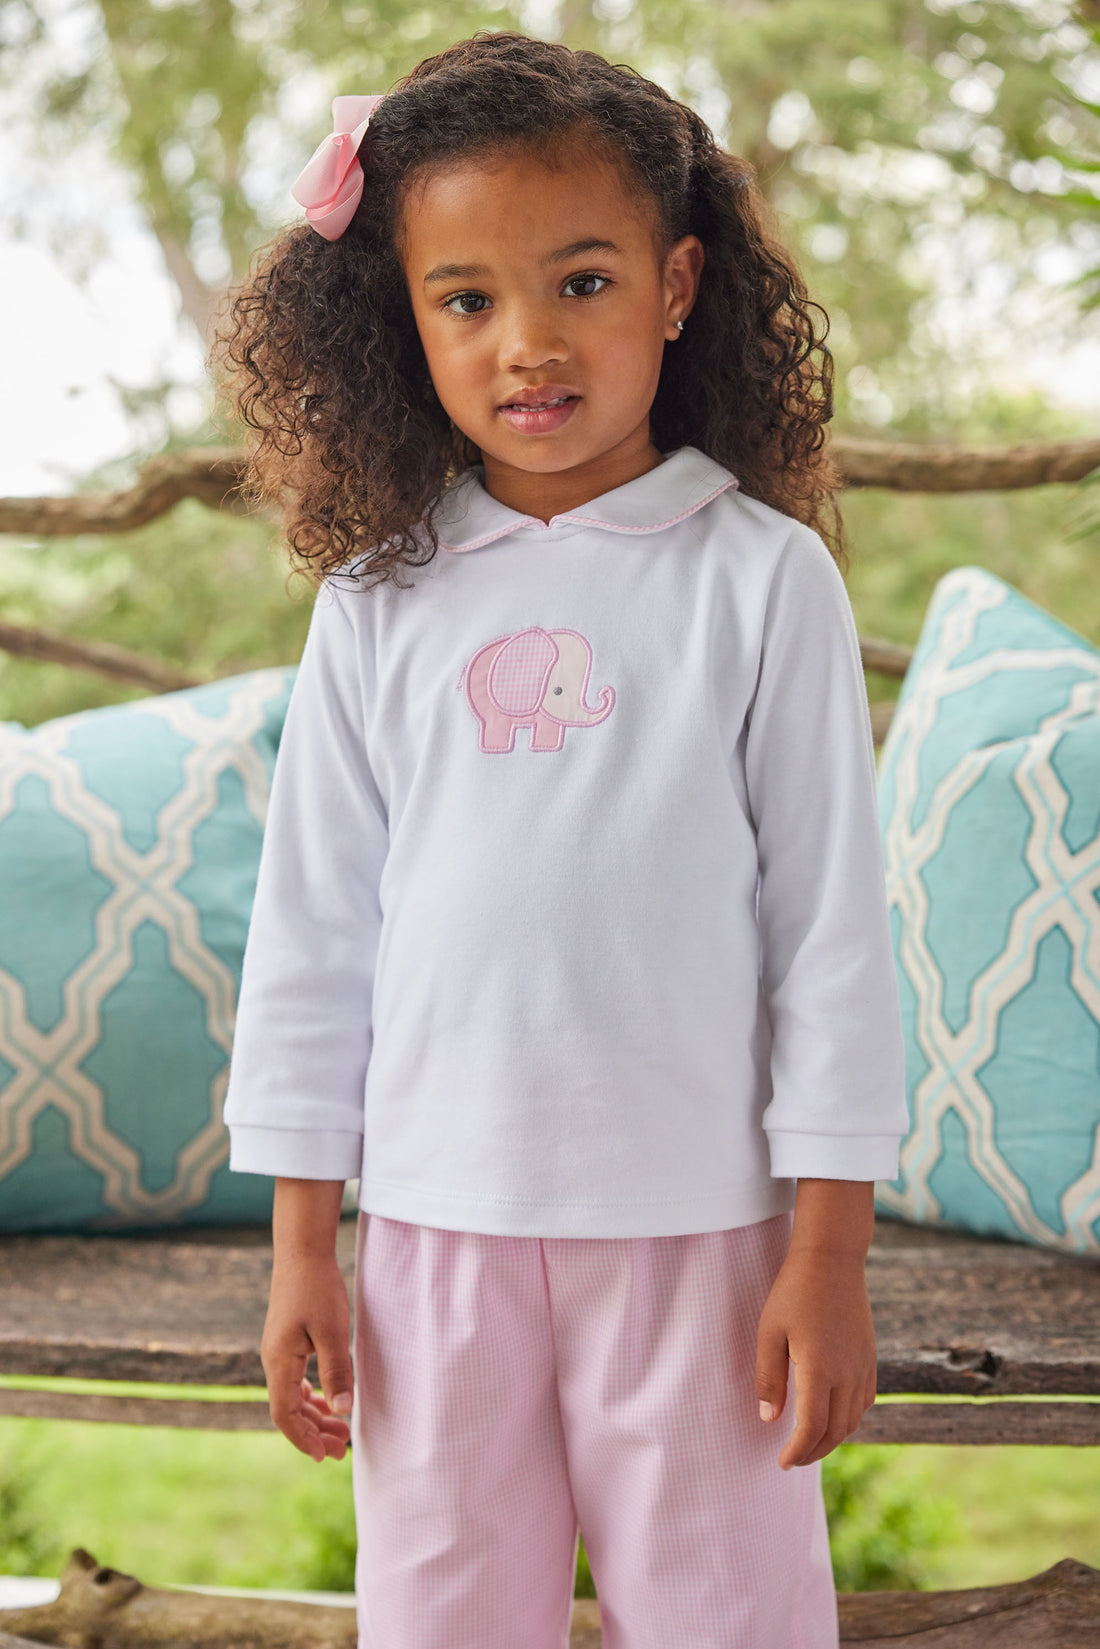 Little English classic childrens clothing toddler girl light pink pant set with applique elephant on shirt with peter pan collar